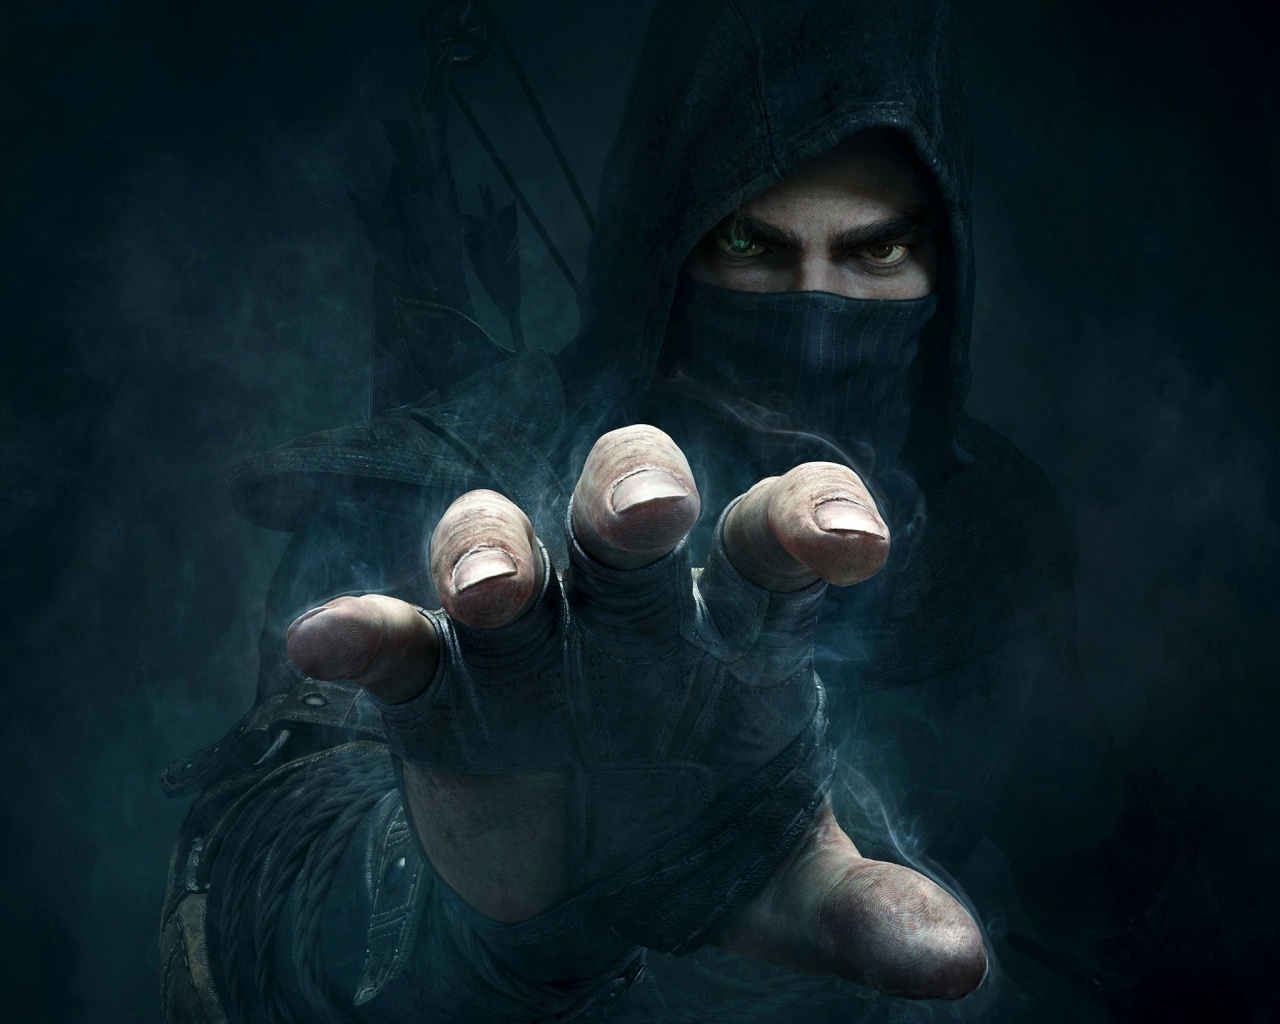 Thief Video Game for 1280 x 1024 resolution